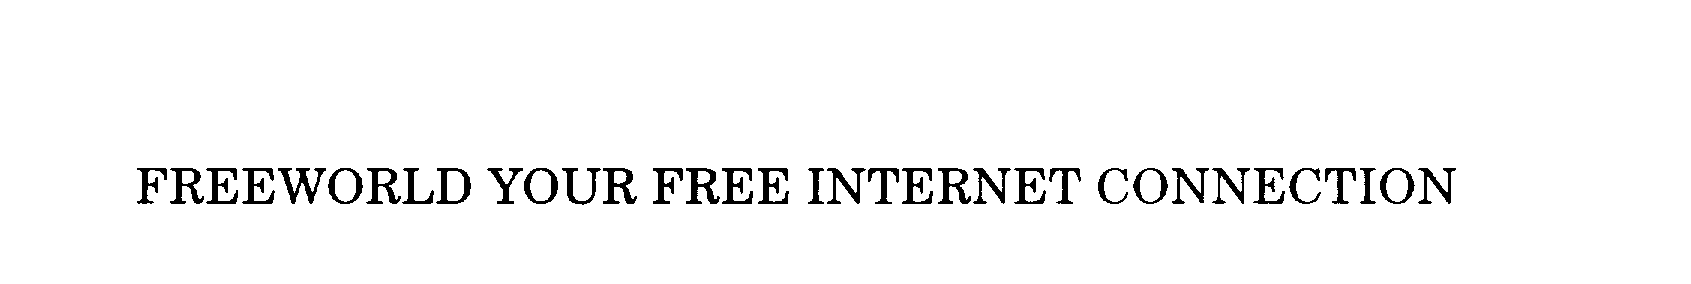  FREEWORLD YOUR FREE INTERNET CONNECTION